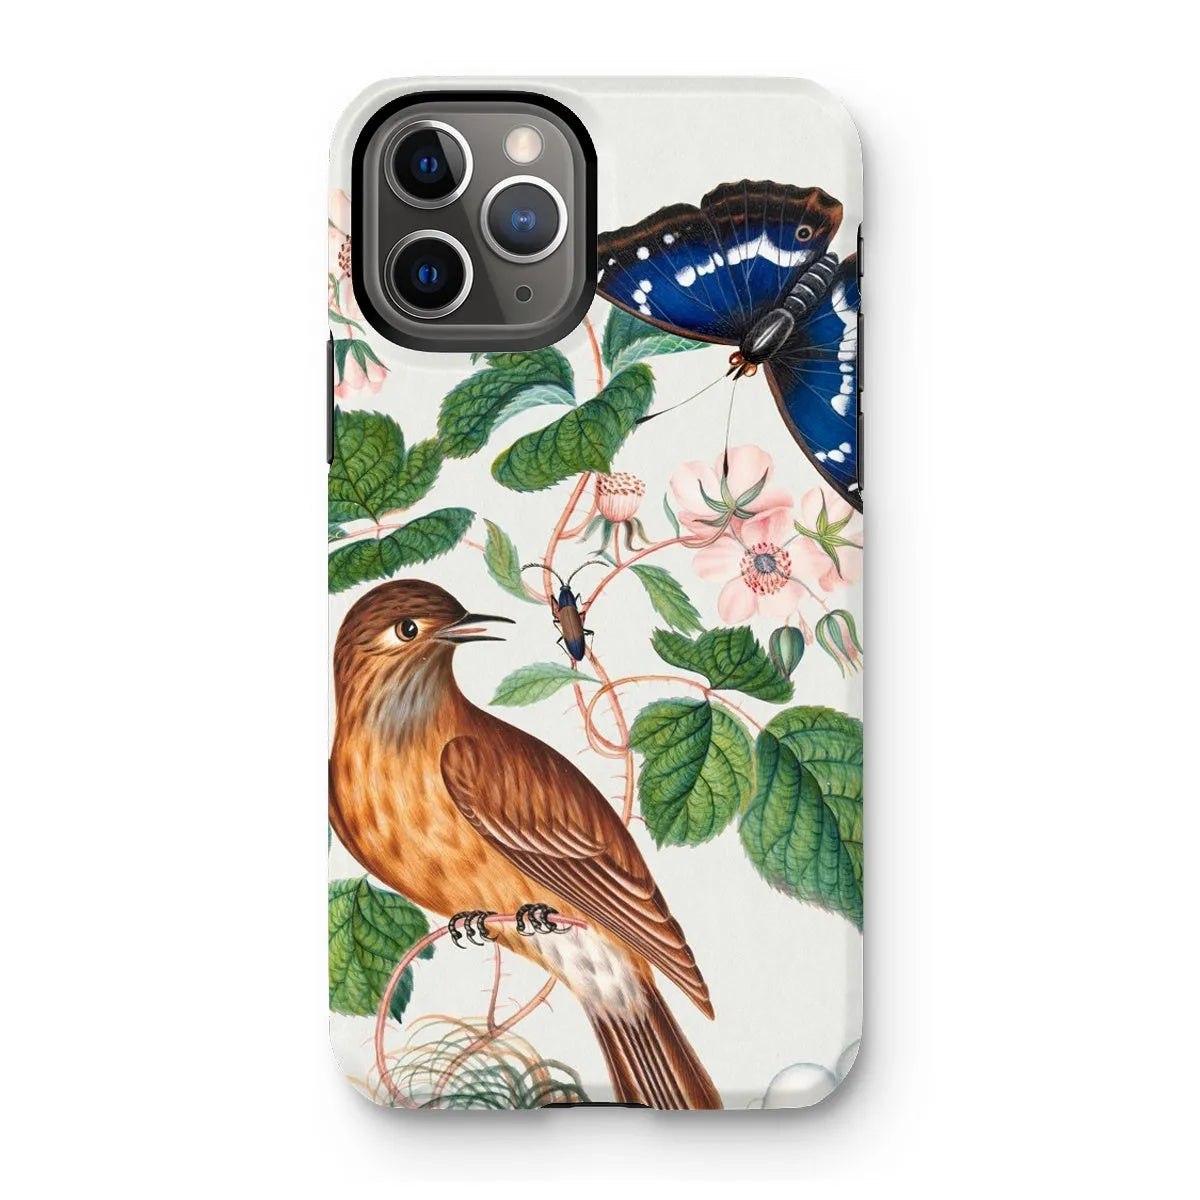 Flycatcher Emperor And Beetle - Art Phone Case - James Bolton - Iphone 11 Pro / Matte - Mobile Phone Cases - Aesthetic